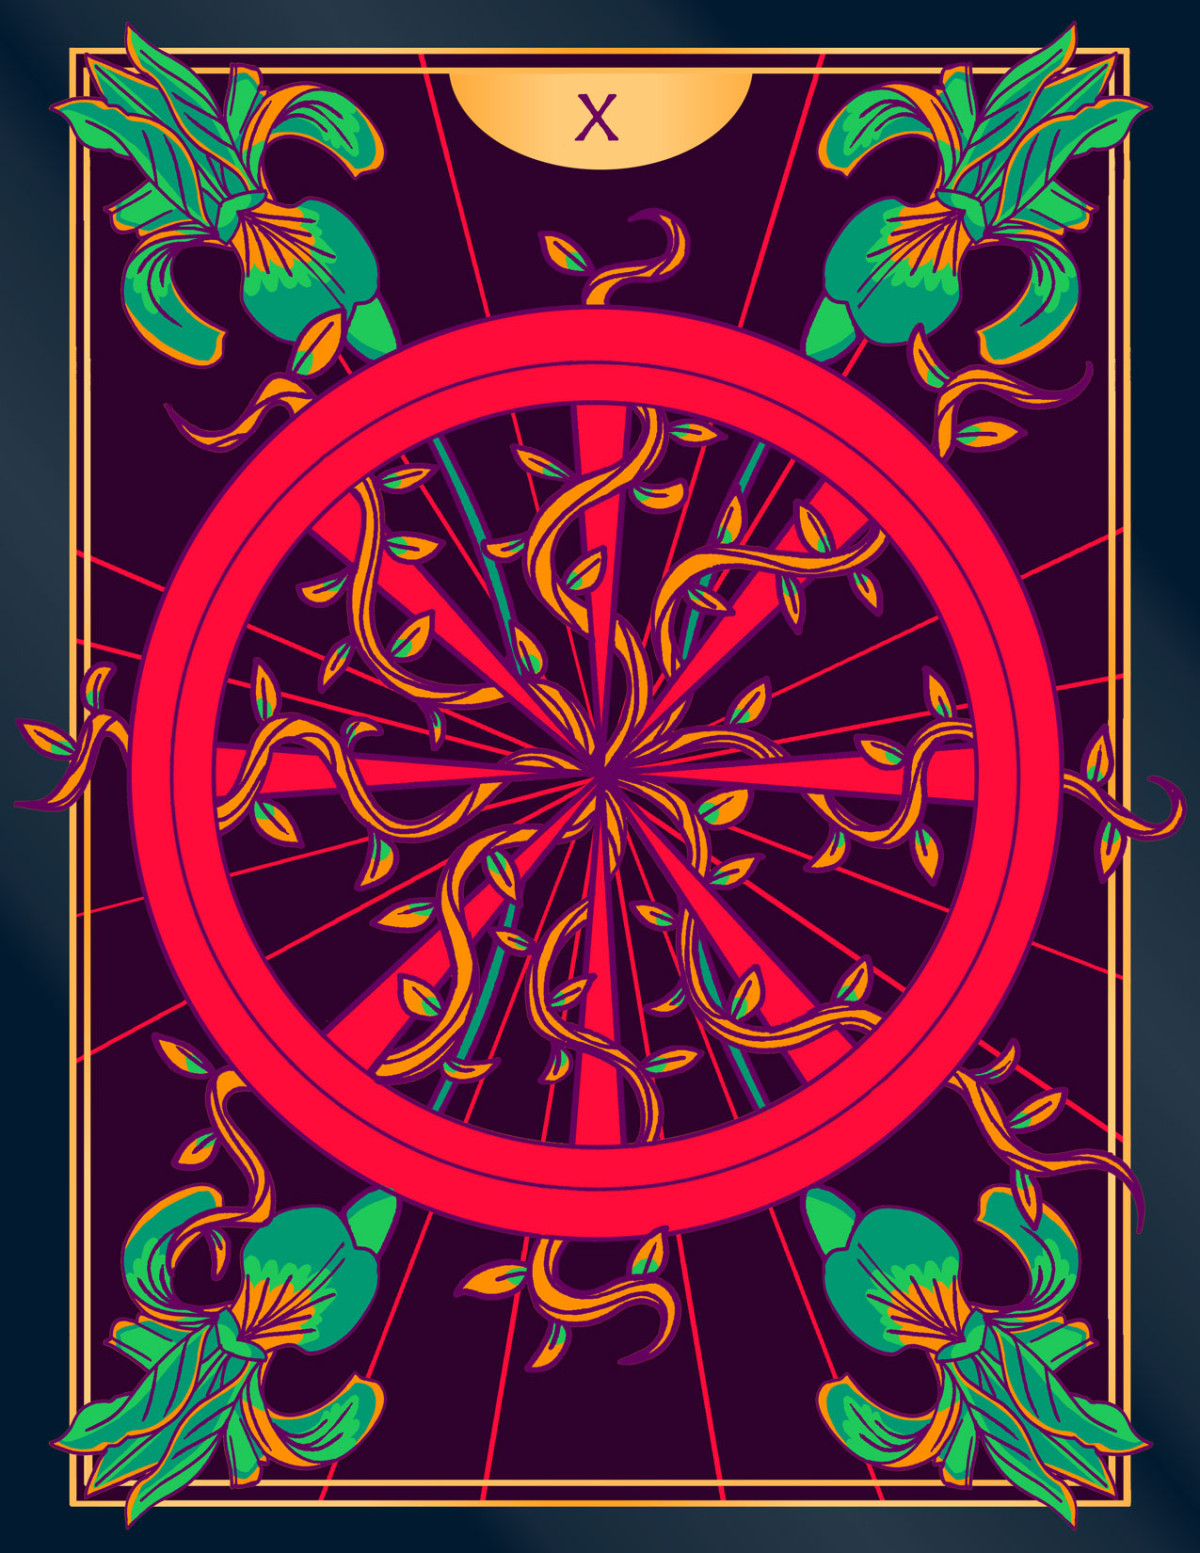 The Wheel of Fortune (Card #10), Digital, 17.71 x 22.92, 2021